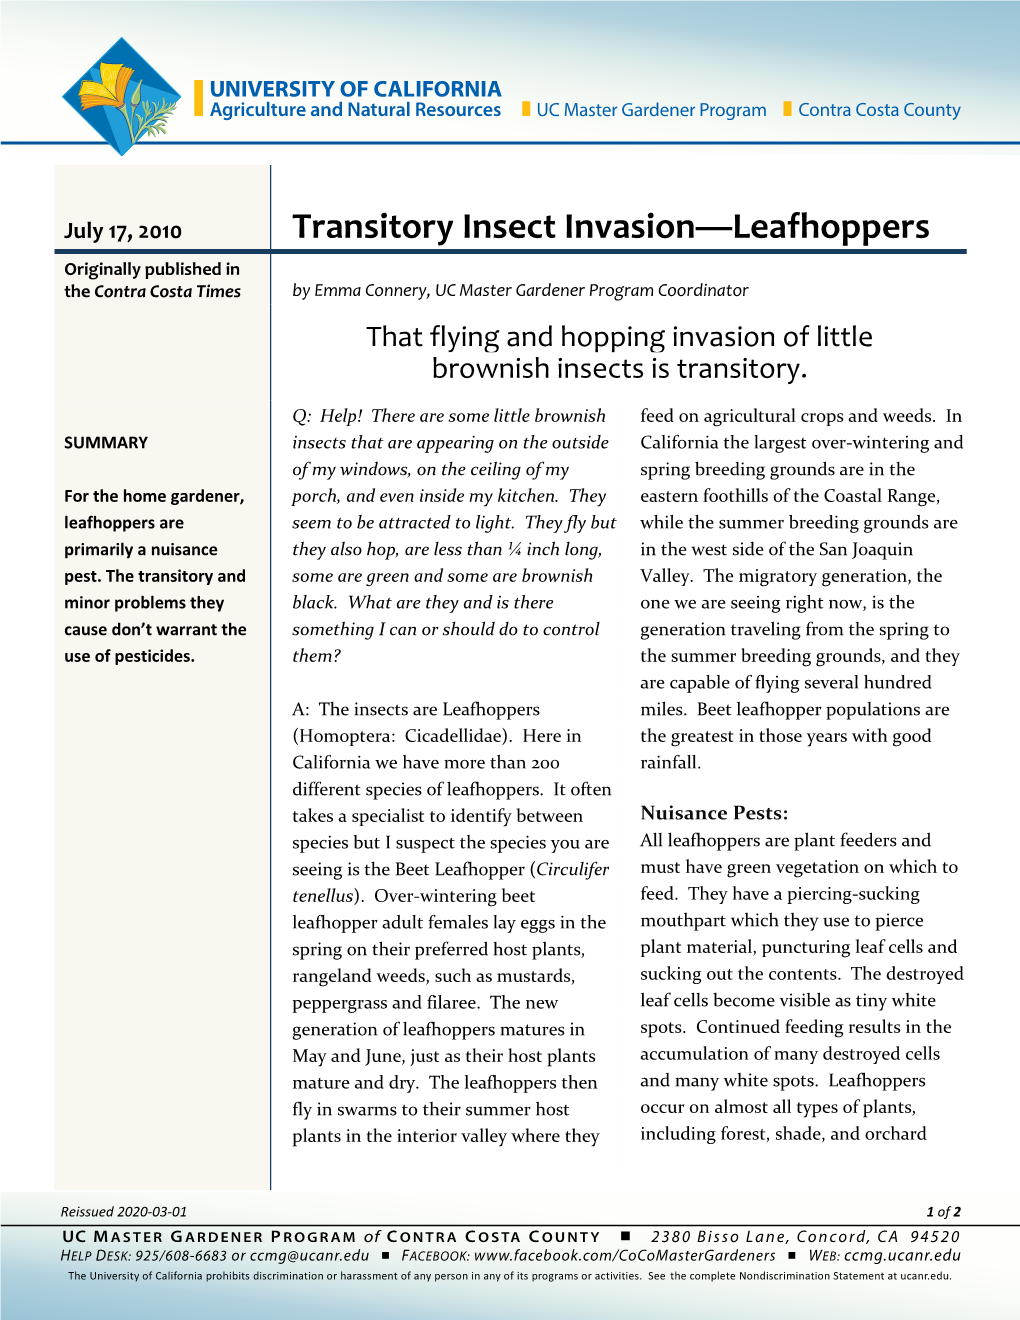 Leafhoppers-Transitory Insects